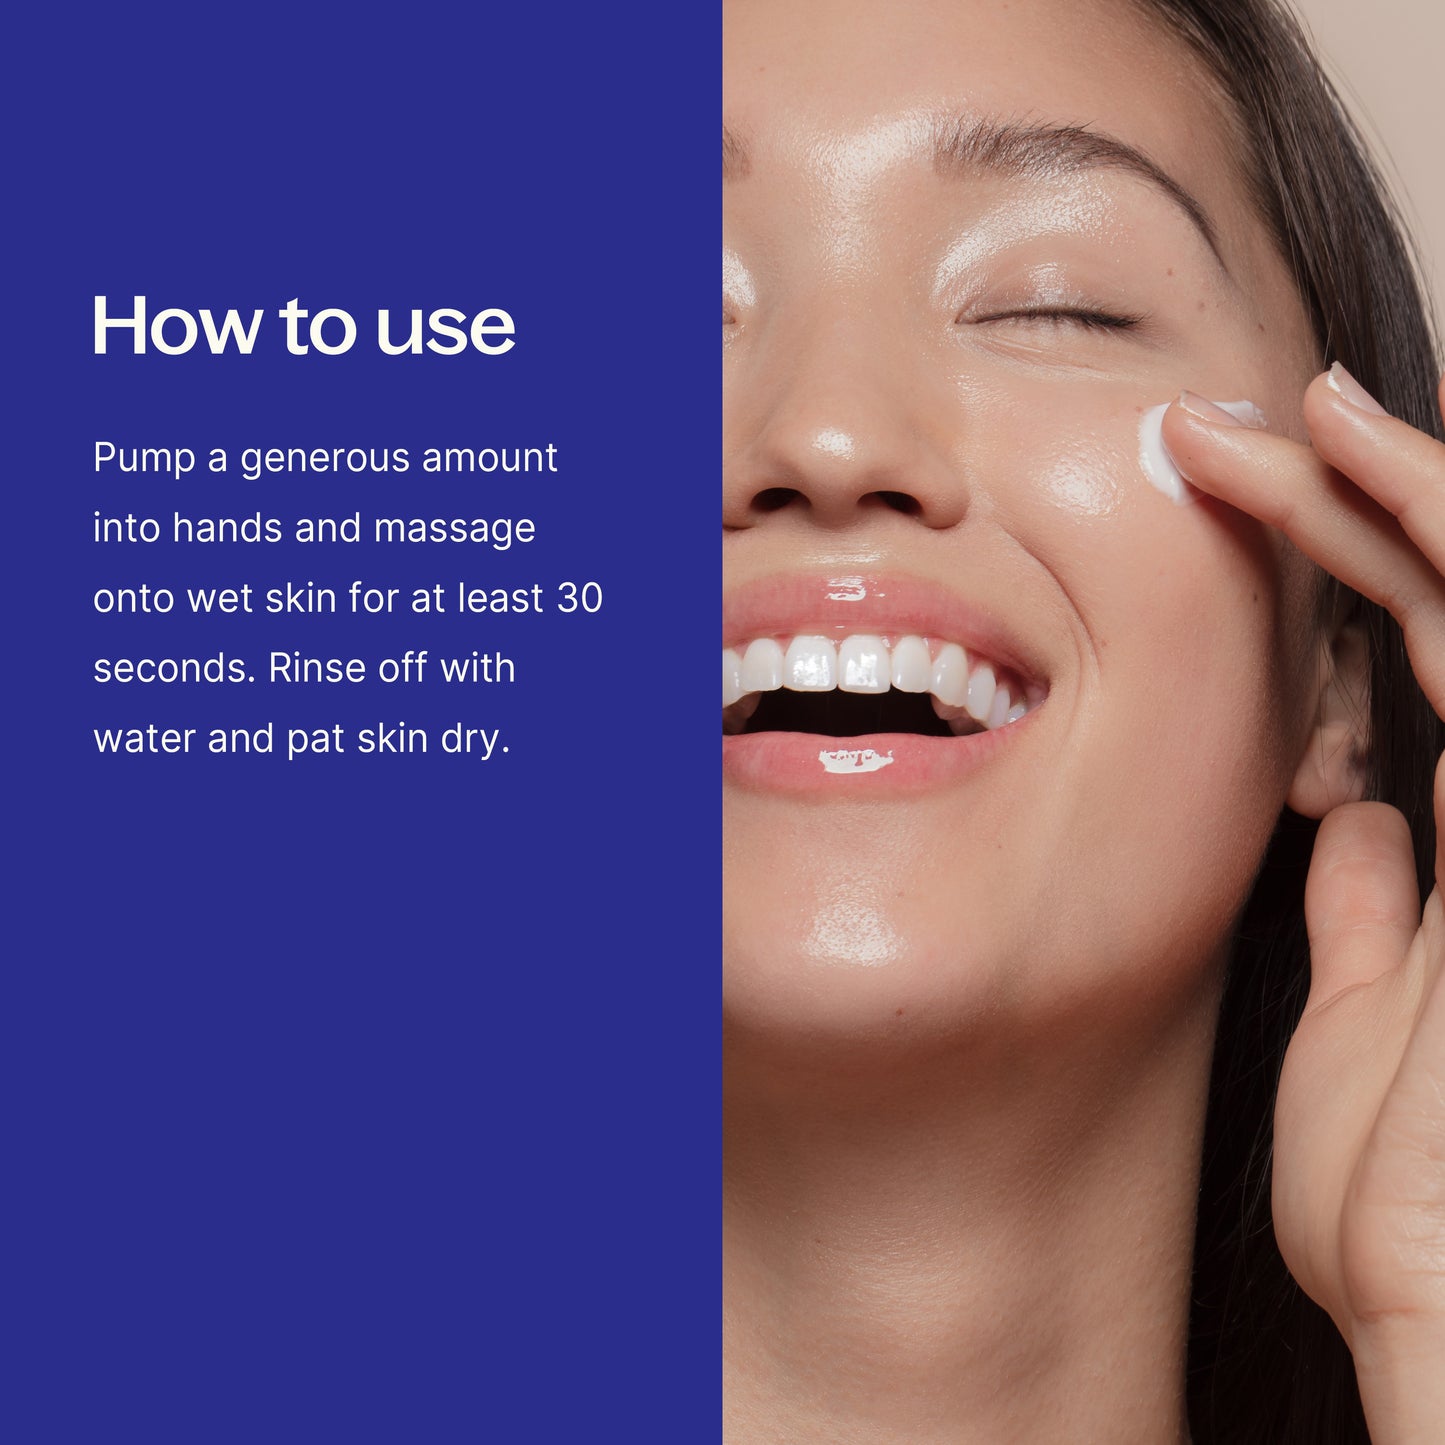 How to use: Pump a generous amount into hands and massage into wet sking for at least 30 seconds. Rinse off with water and pat skin dry. 